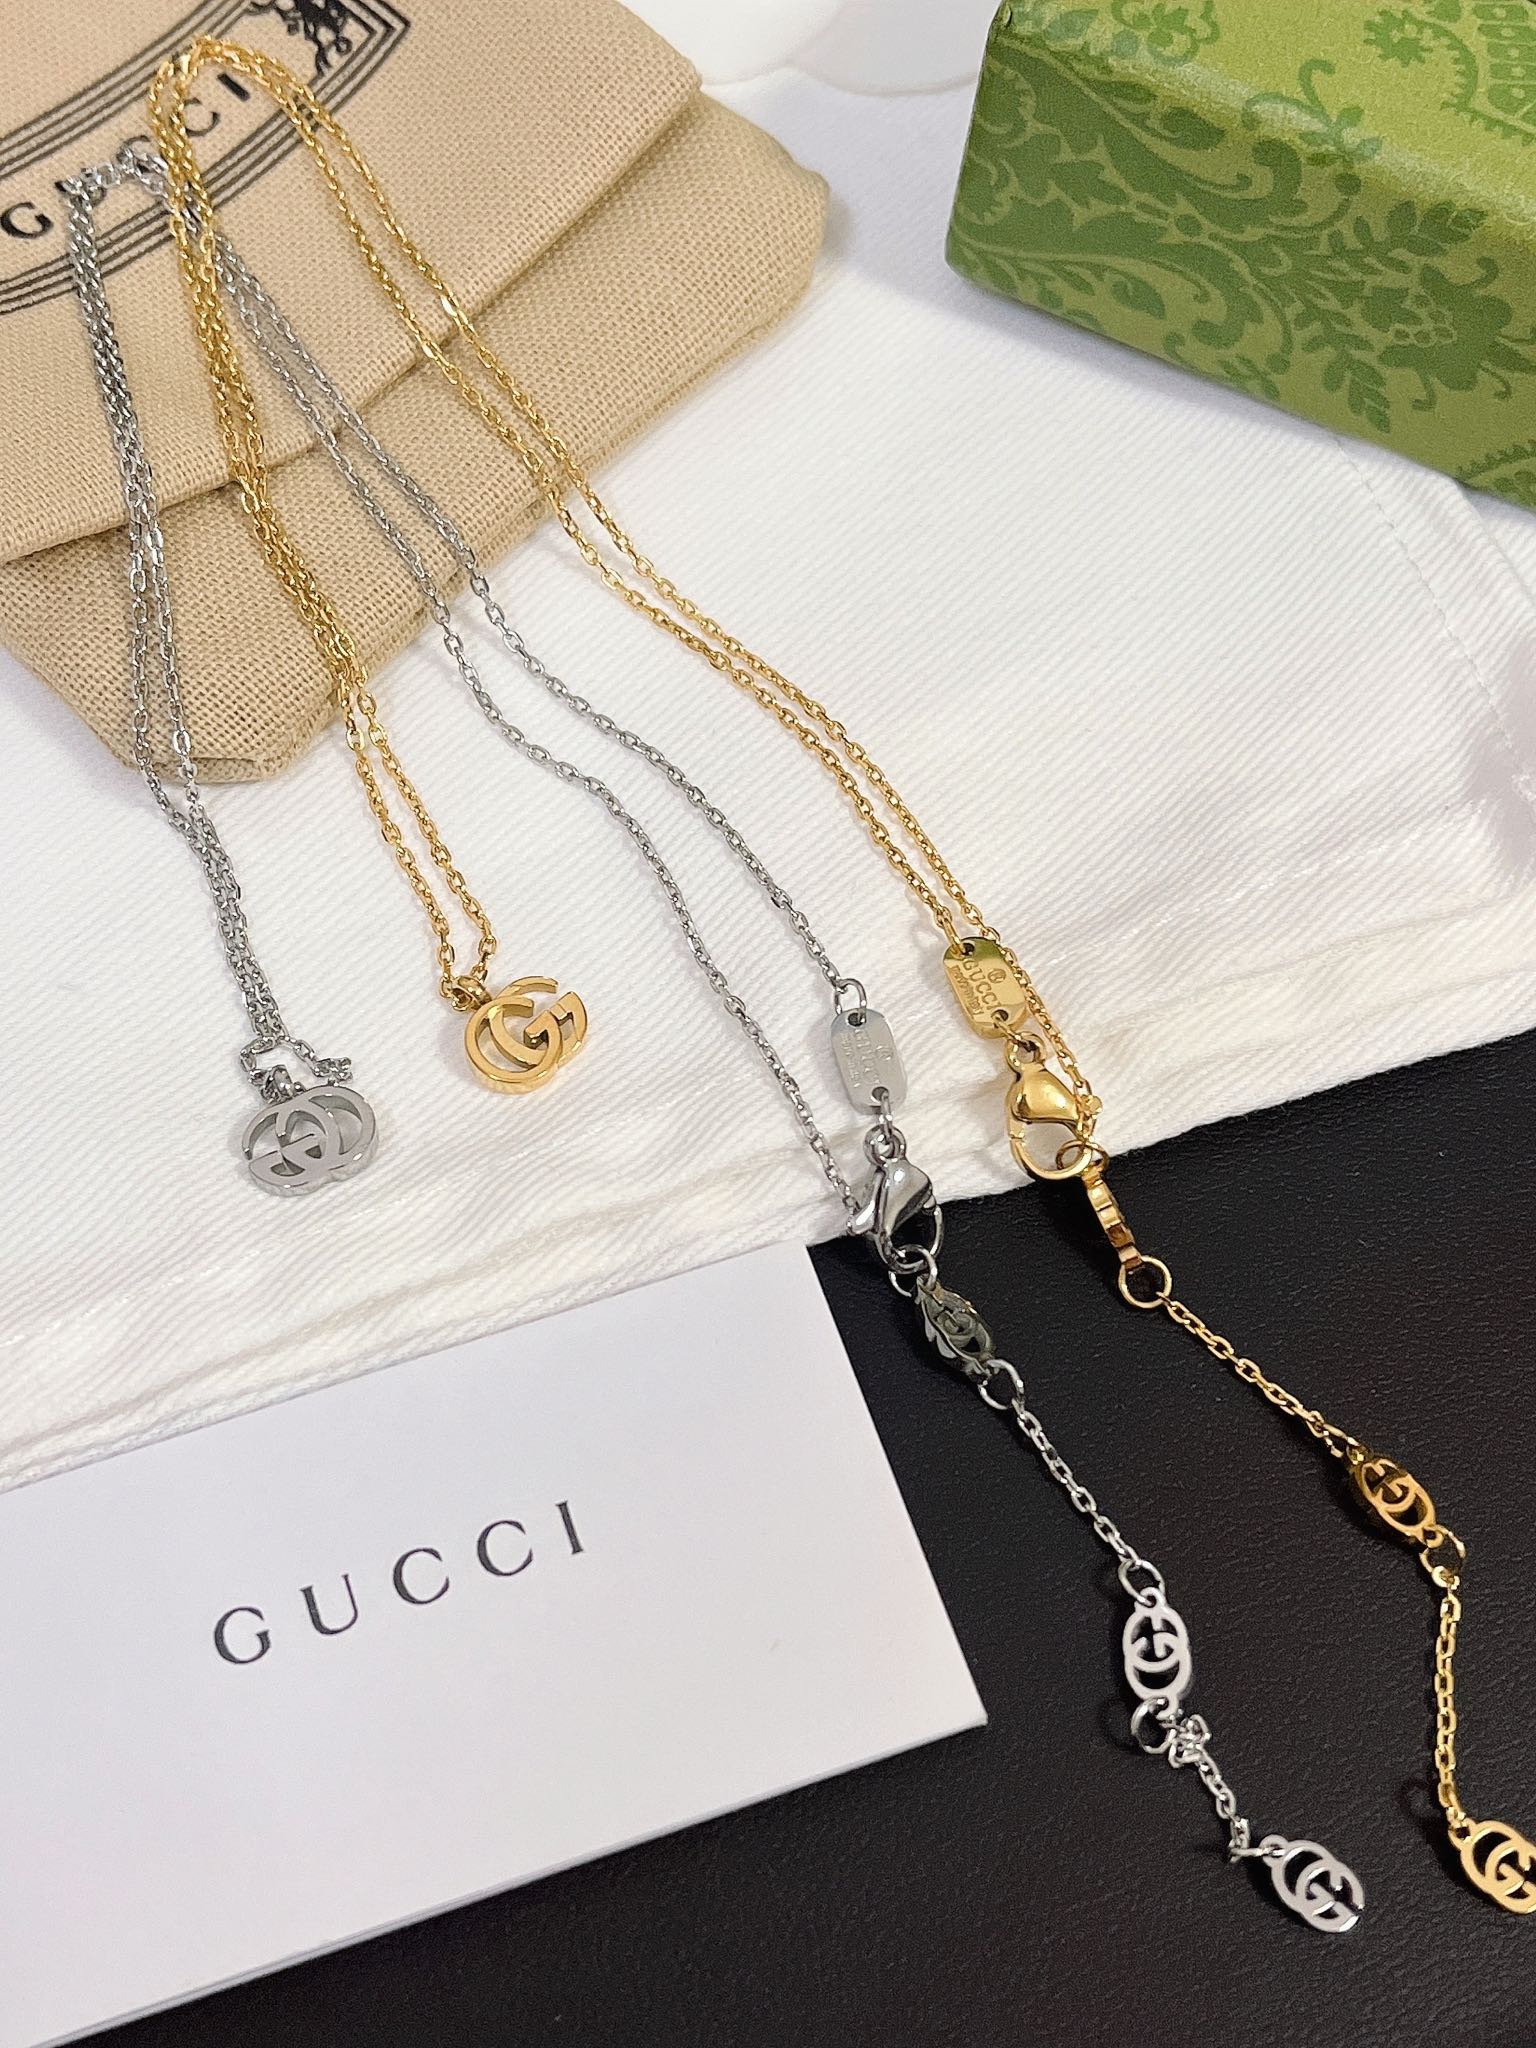 X564 Gucci necklace